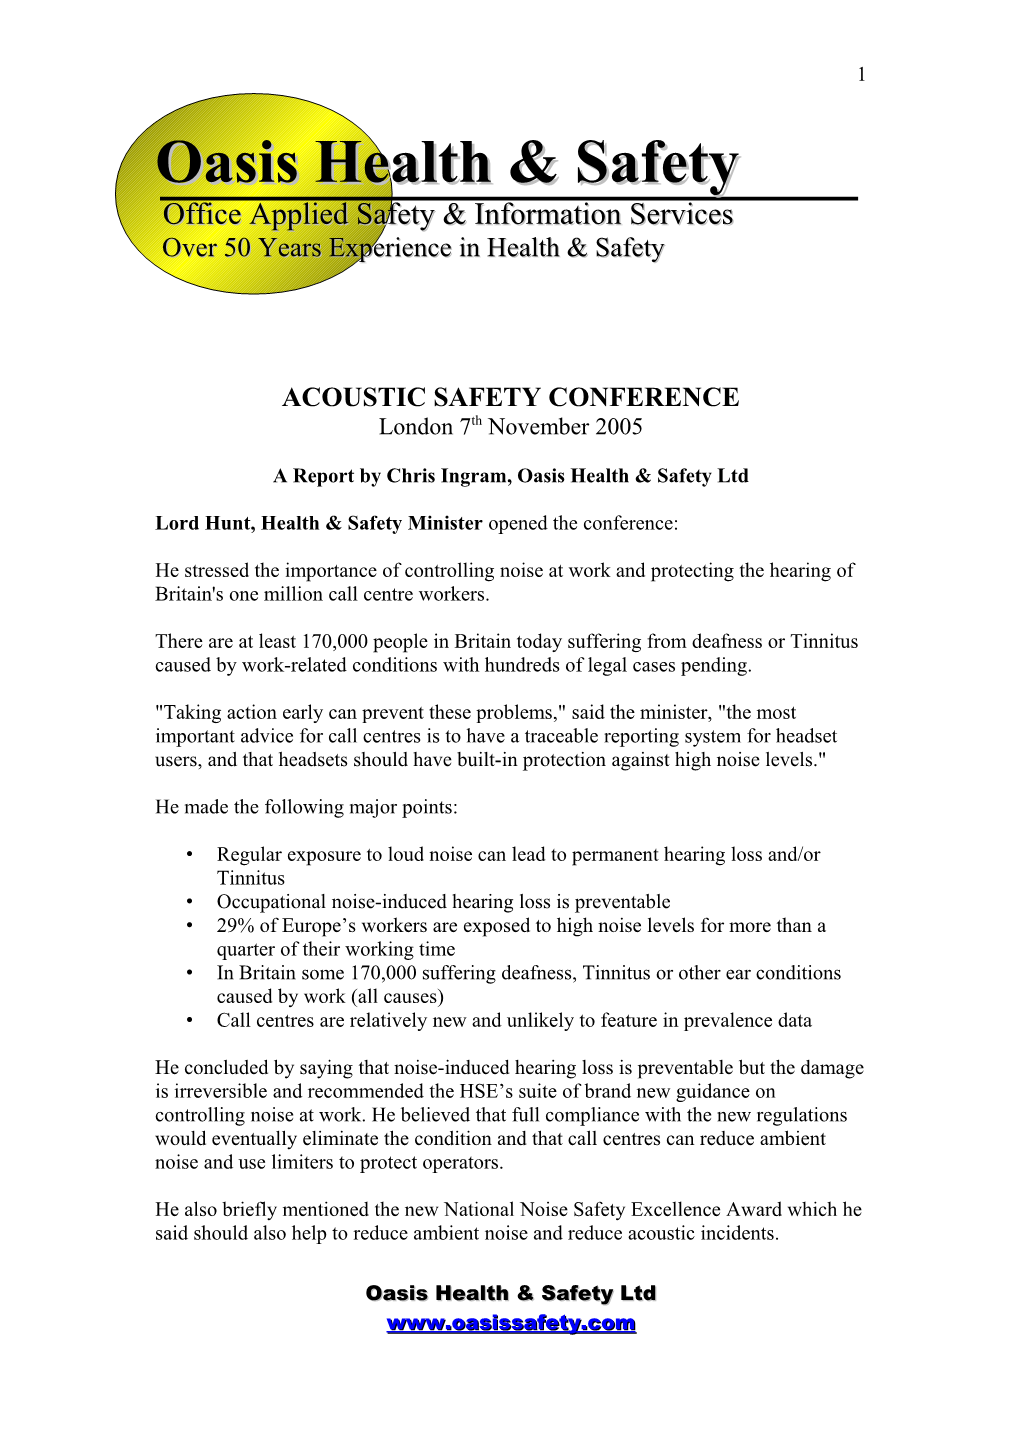 Acoustic Safety Conference